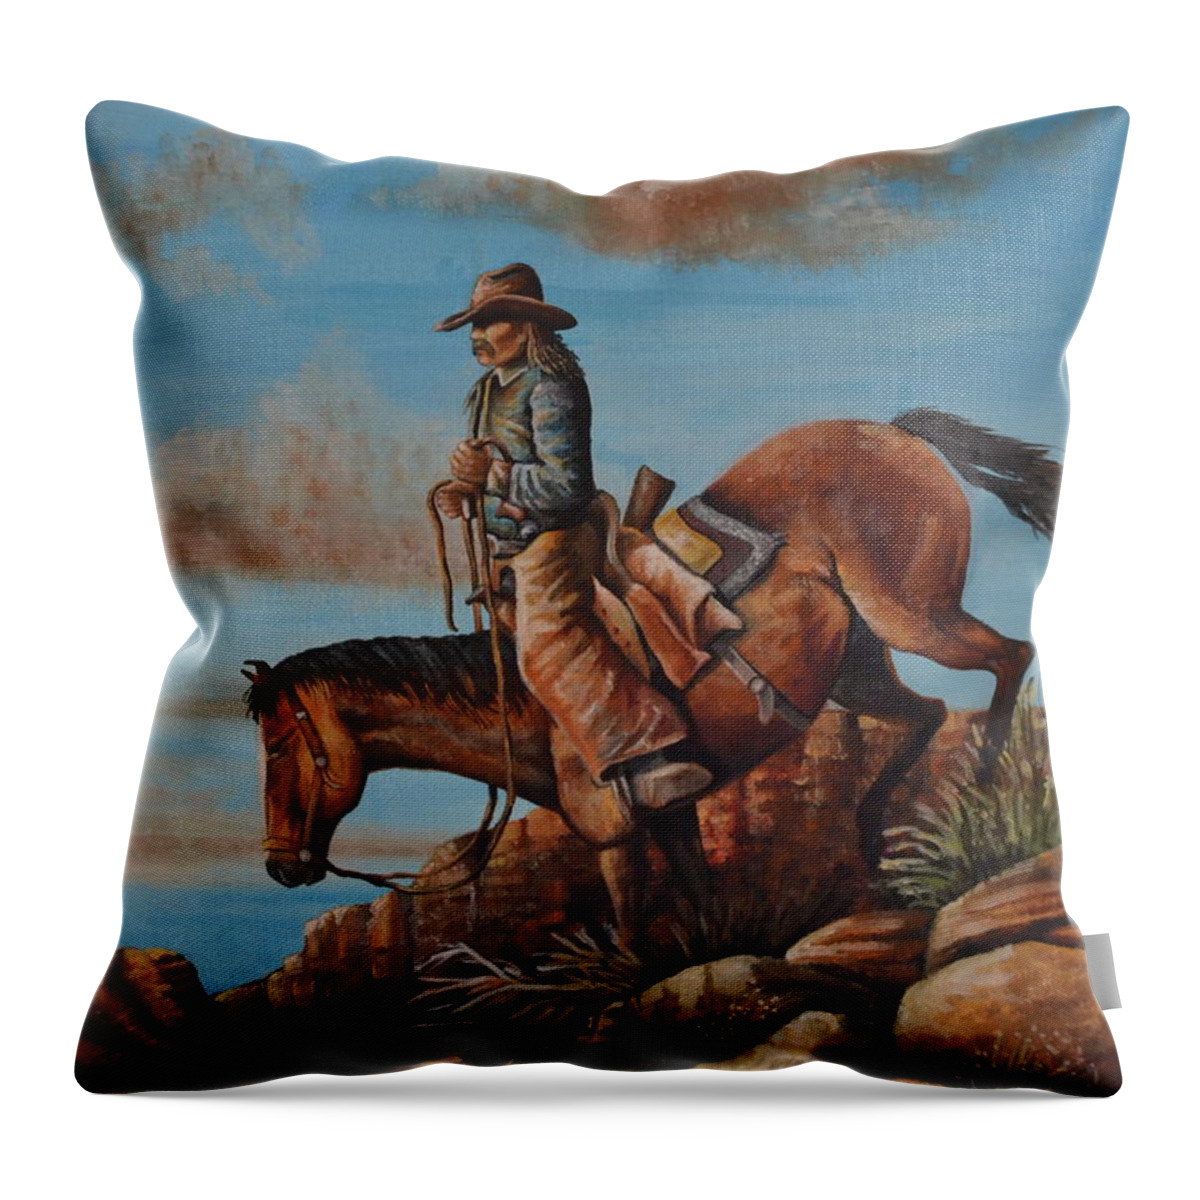 A Texas Ranger Riding His Horse Down A Rocky Mountain In Northern Texas. There Is A Blue Sky And Multi-colored Rocks With Some Desert Brush. Throw Pillow featuring the painting Texas Ranger by Martin Schmidt